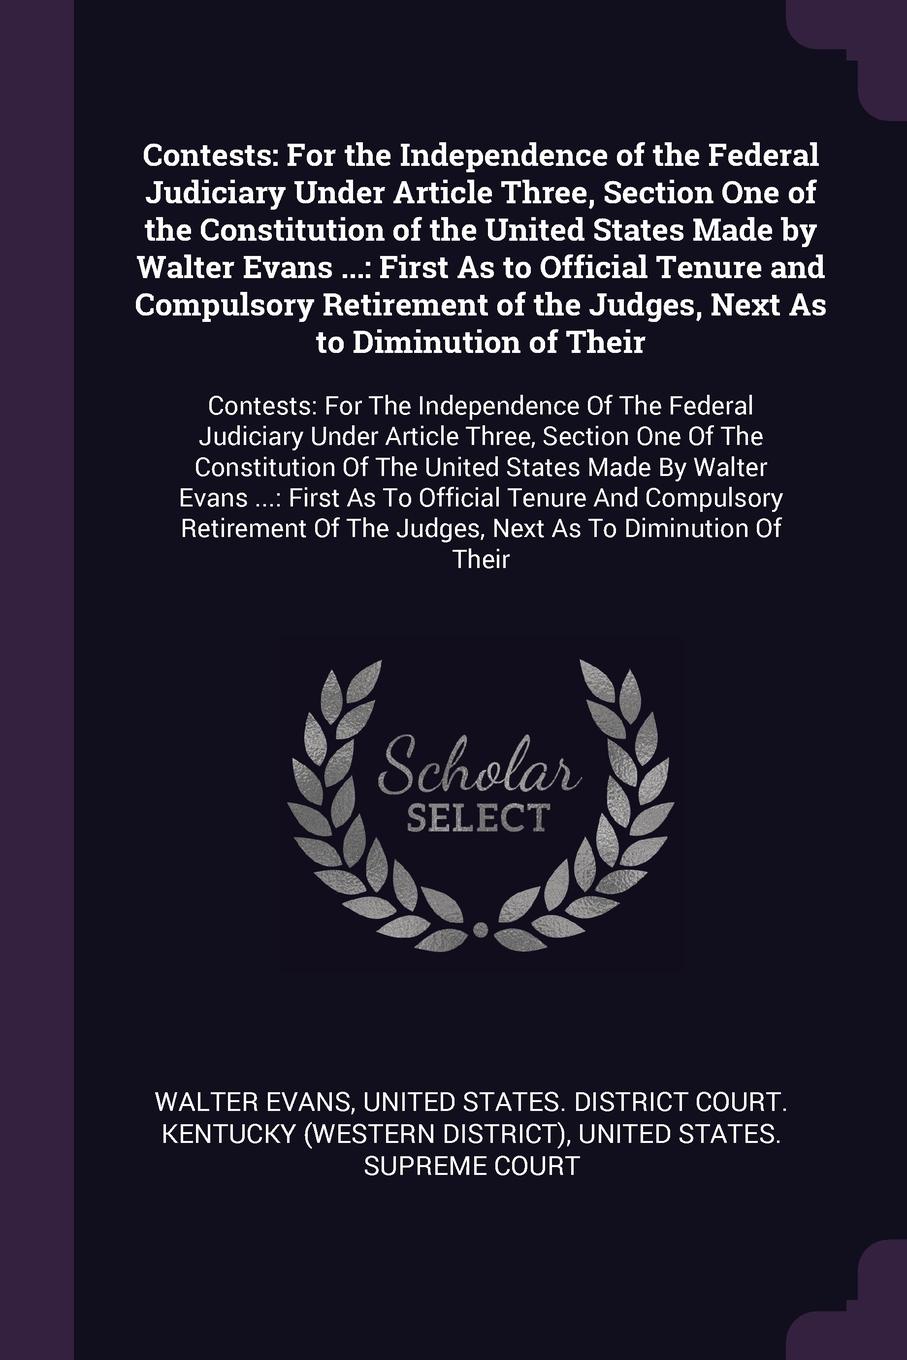 Contests. For the Independence of the Federal Judiciary Under Article Three, Section One of the Constitution of the United States Made by Walter Evans ...: First As to Official Tenure and Compulsory Retirement of the Judges, Next As to Diminution ...